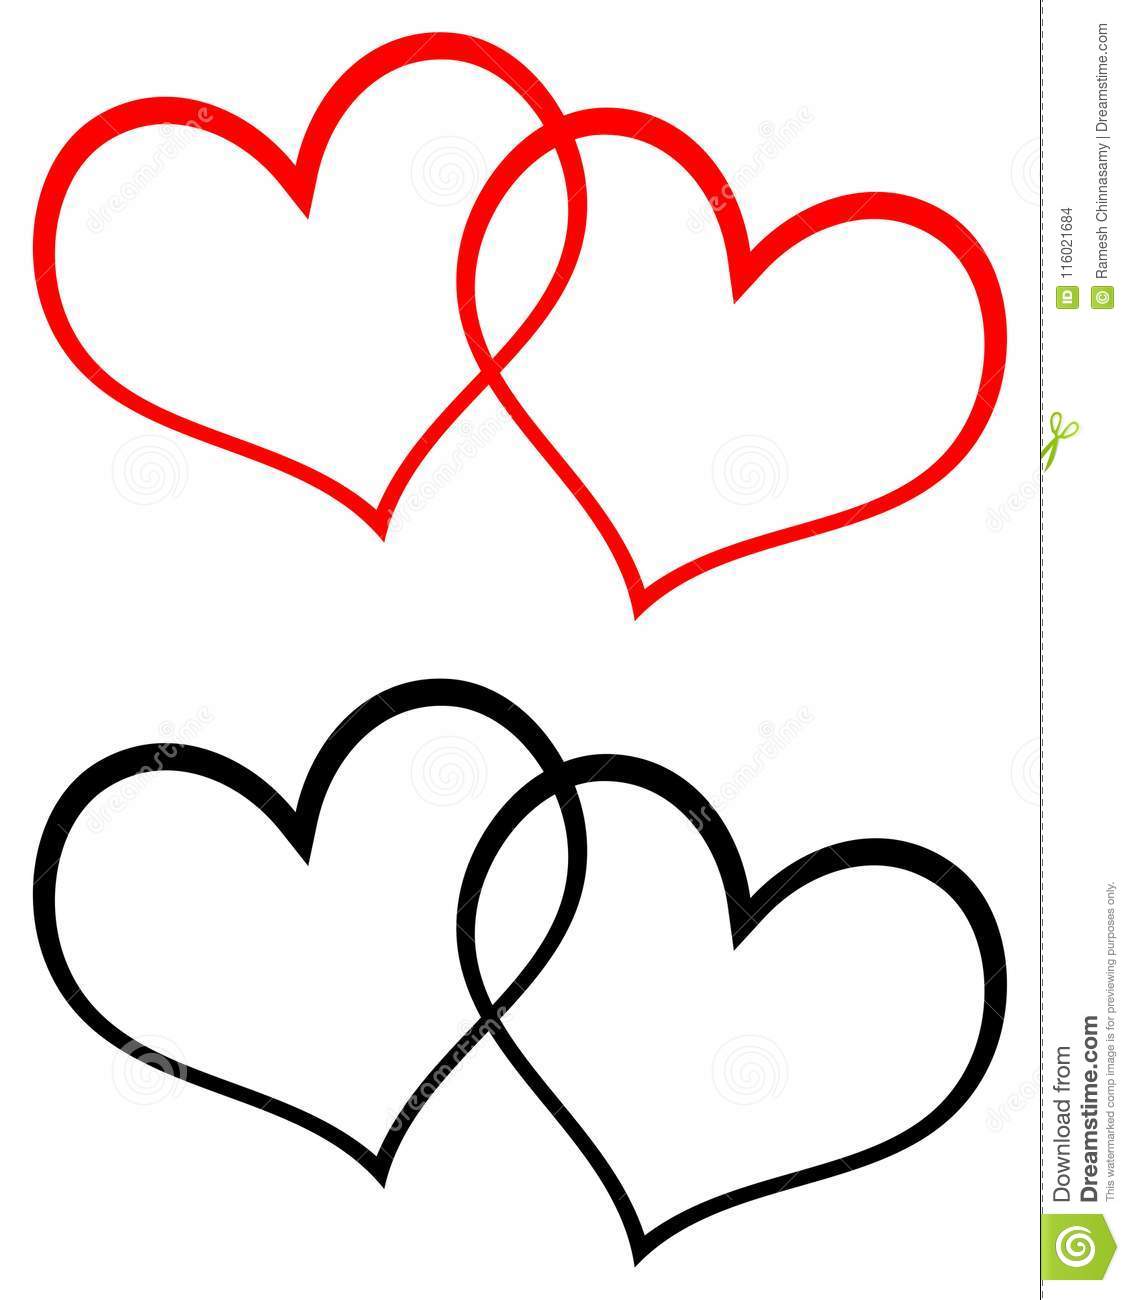 Two Hearts Clipart Best - Gambaran